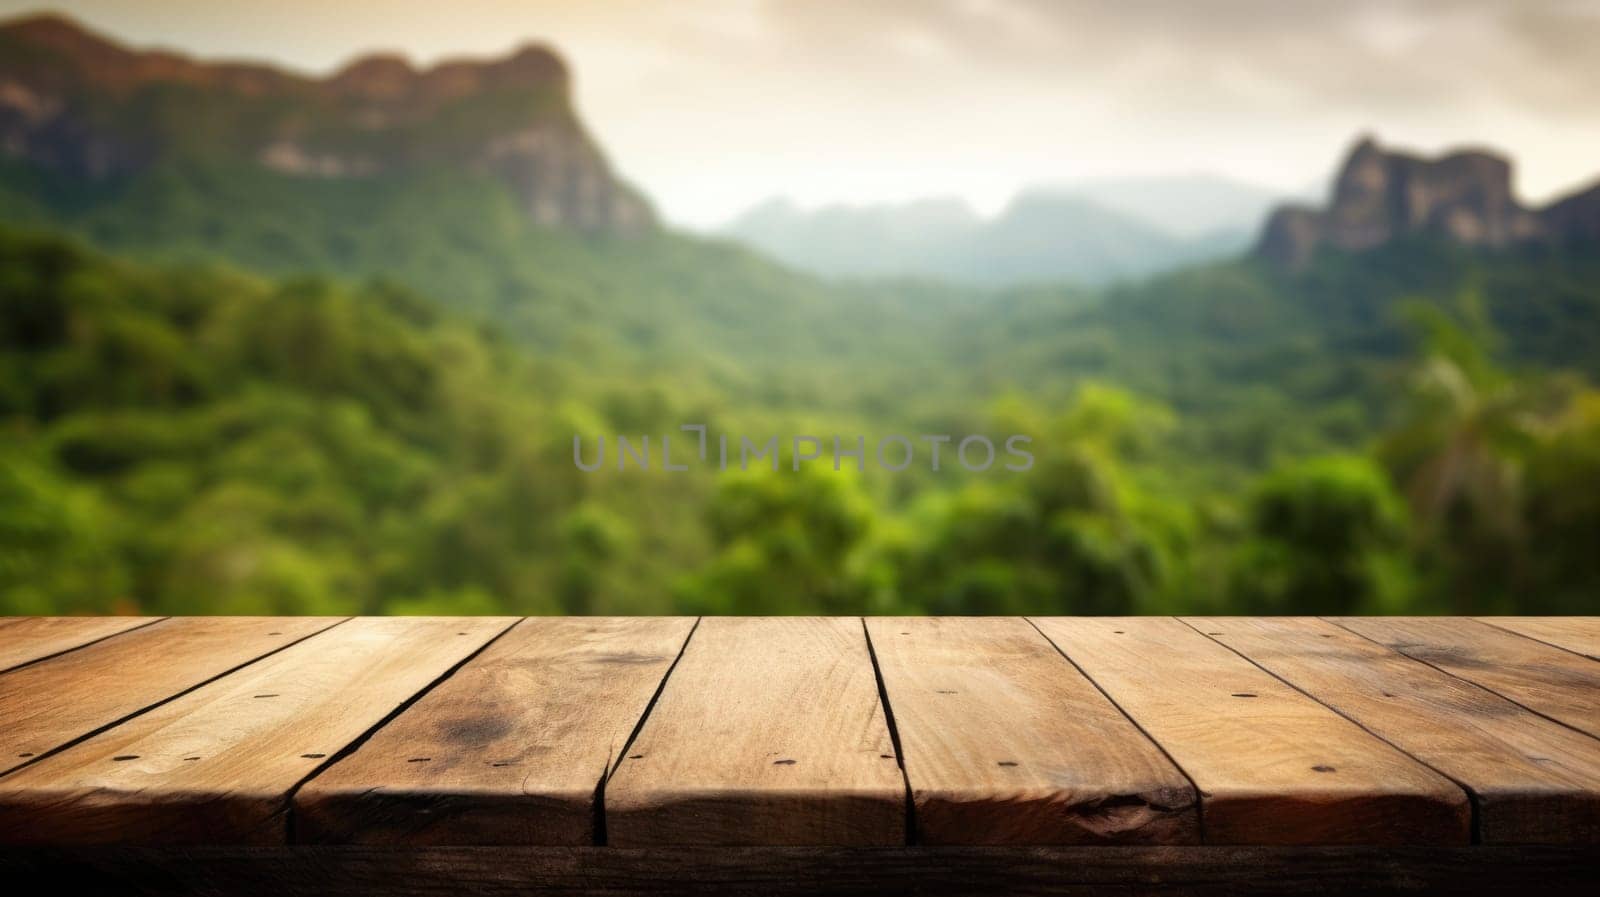 The empty wooden brown table top with blur background of trekking path. Exuberant image.